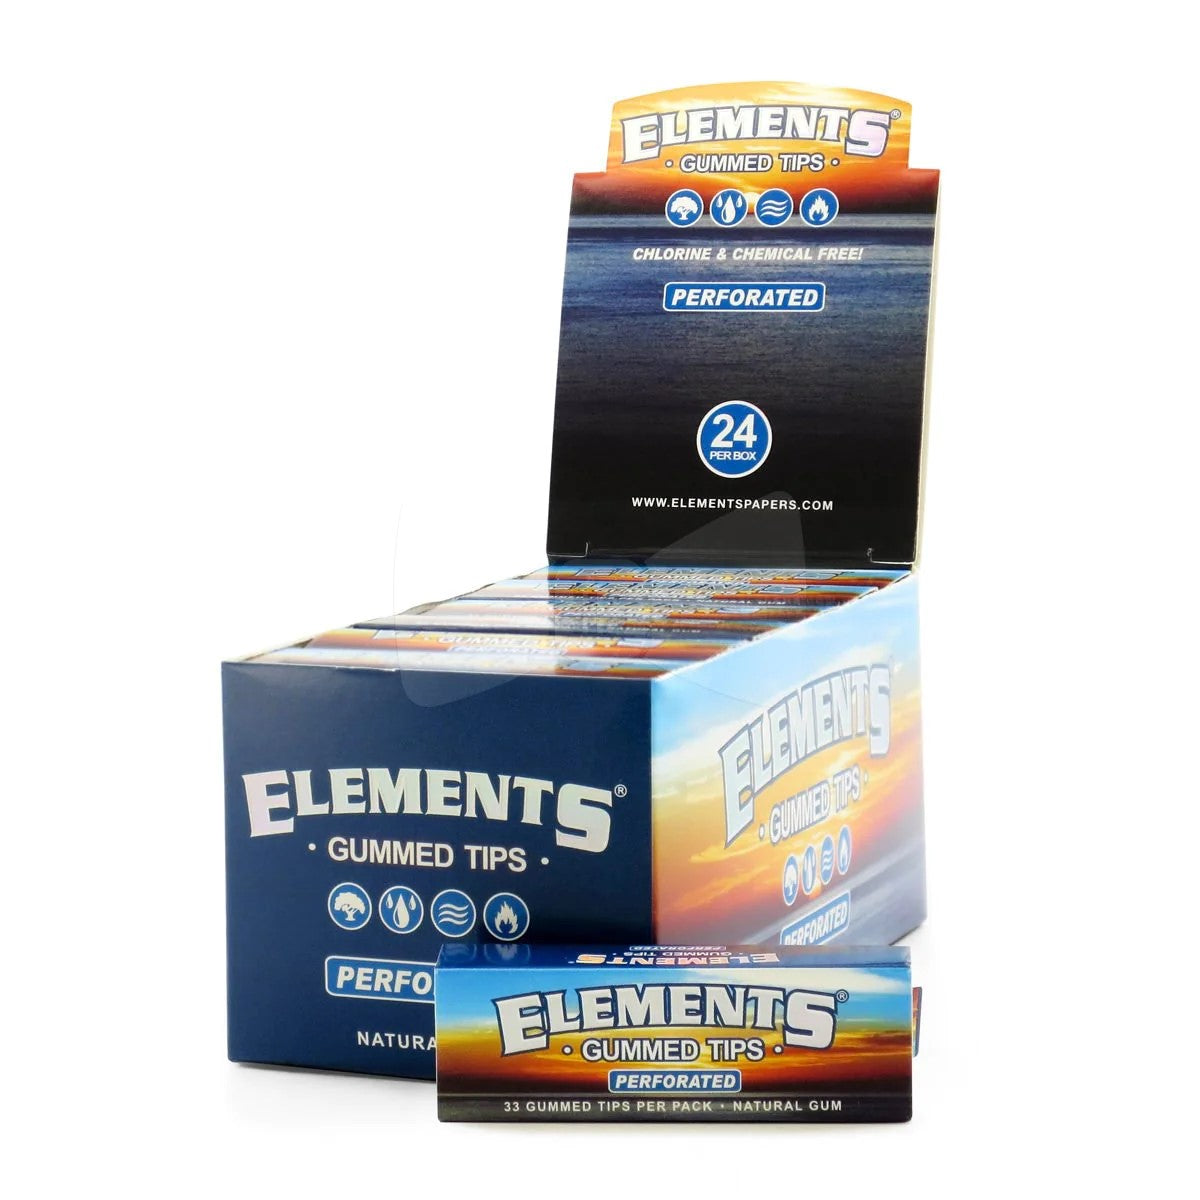 ELEMENTS GUMMED PERFORATED TIPS 33CT 24PK